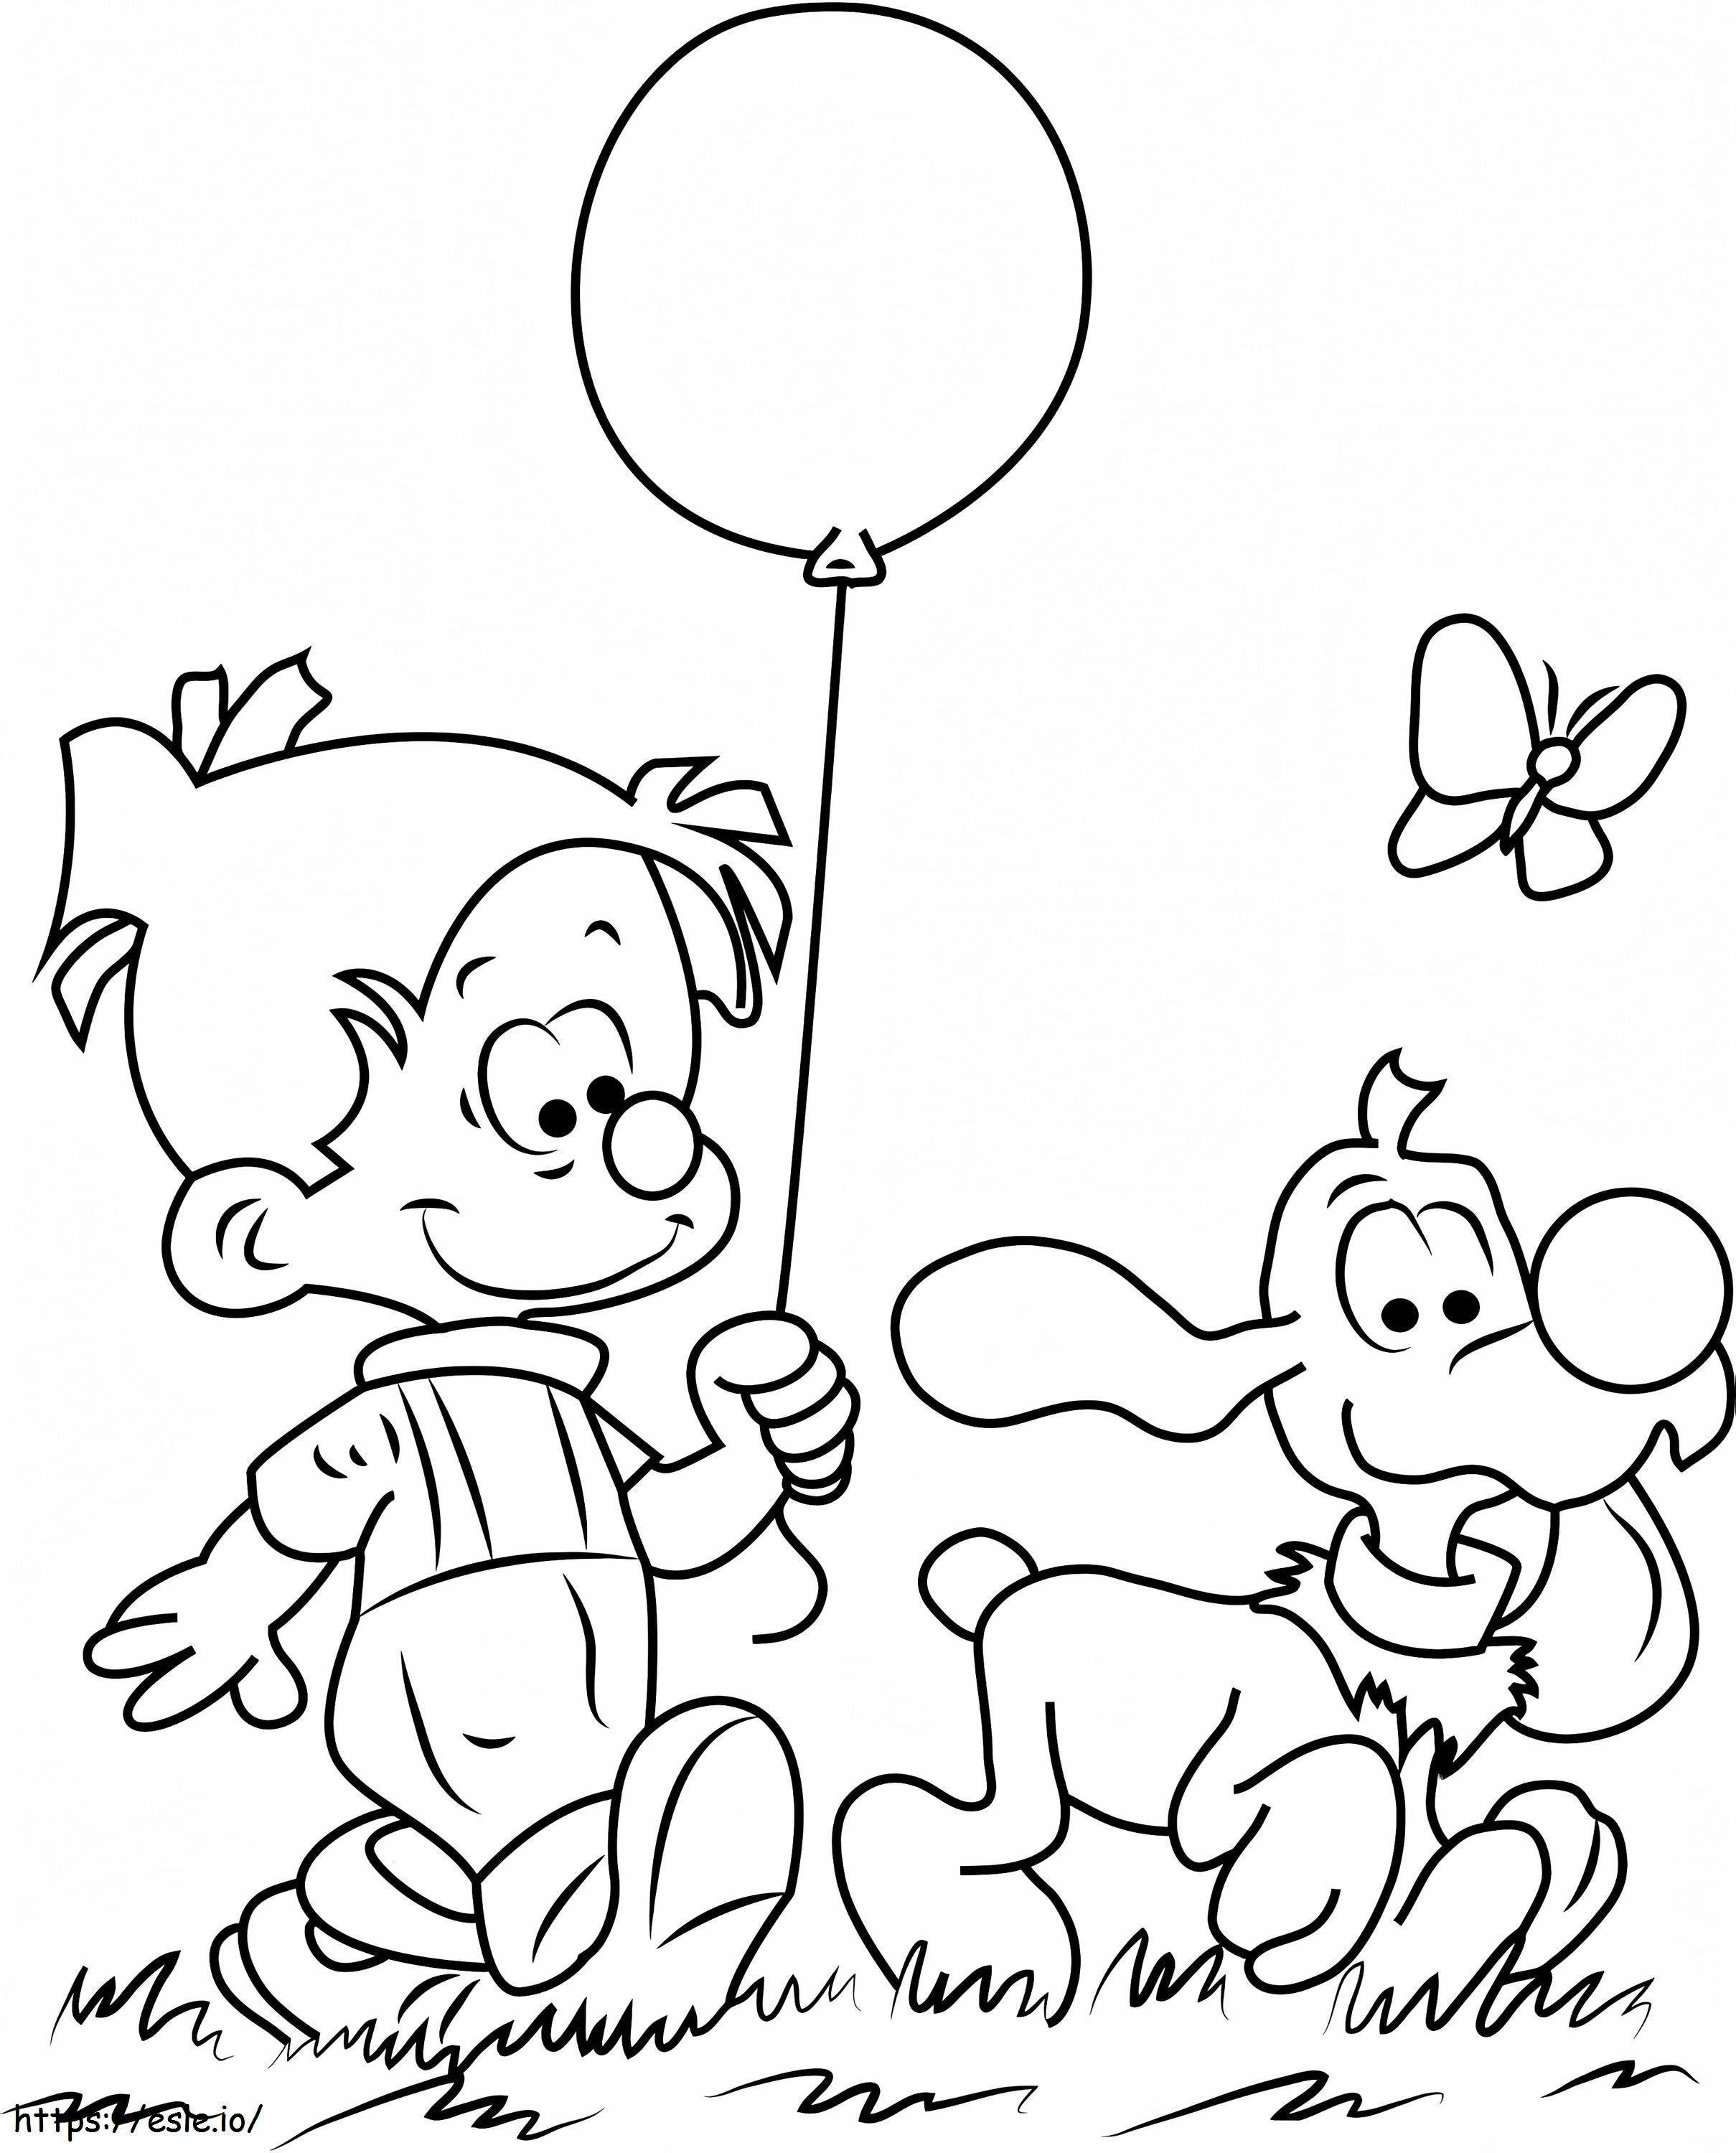 1530065772 56 coloring page